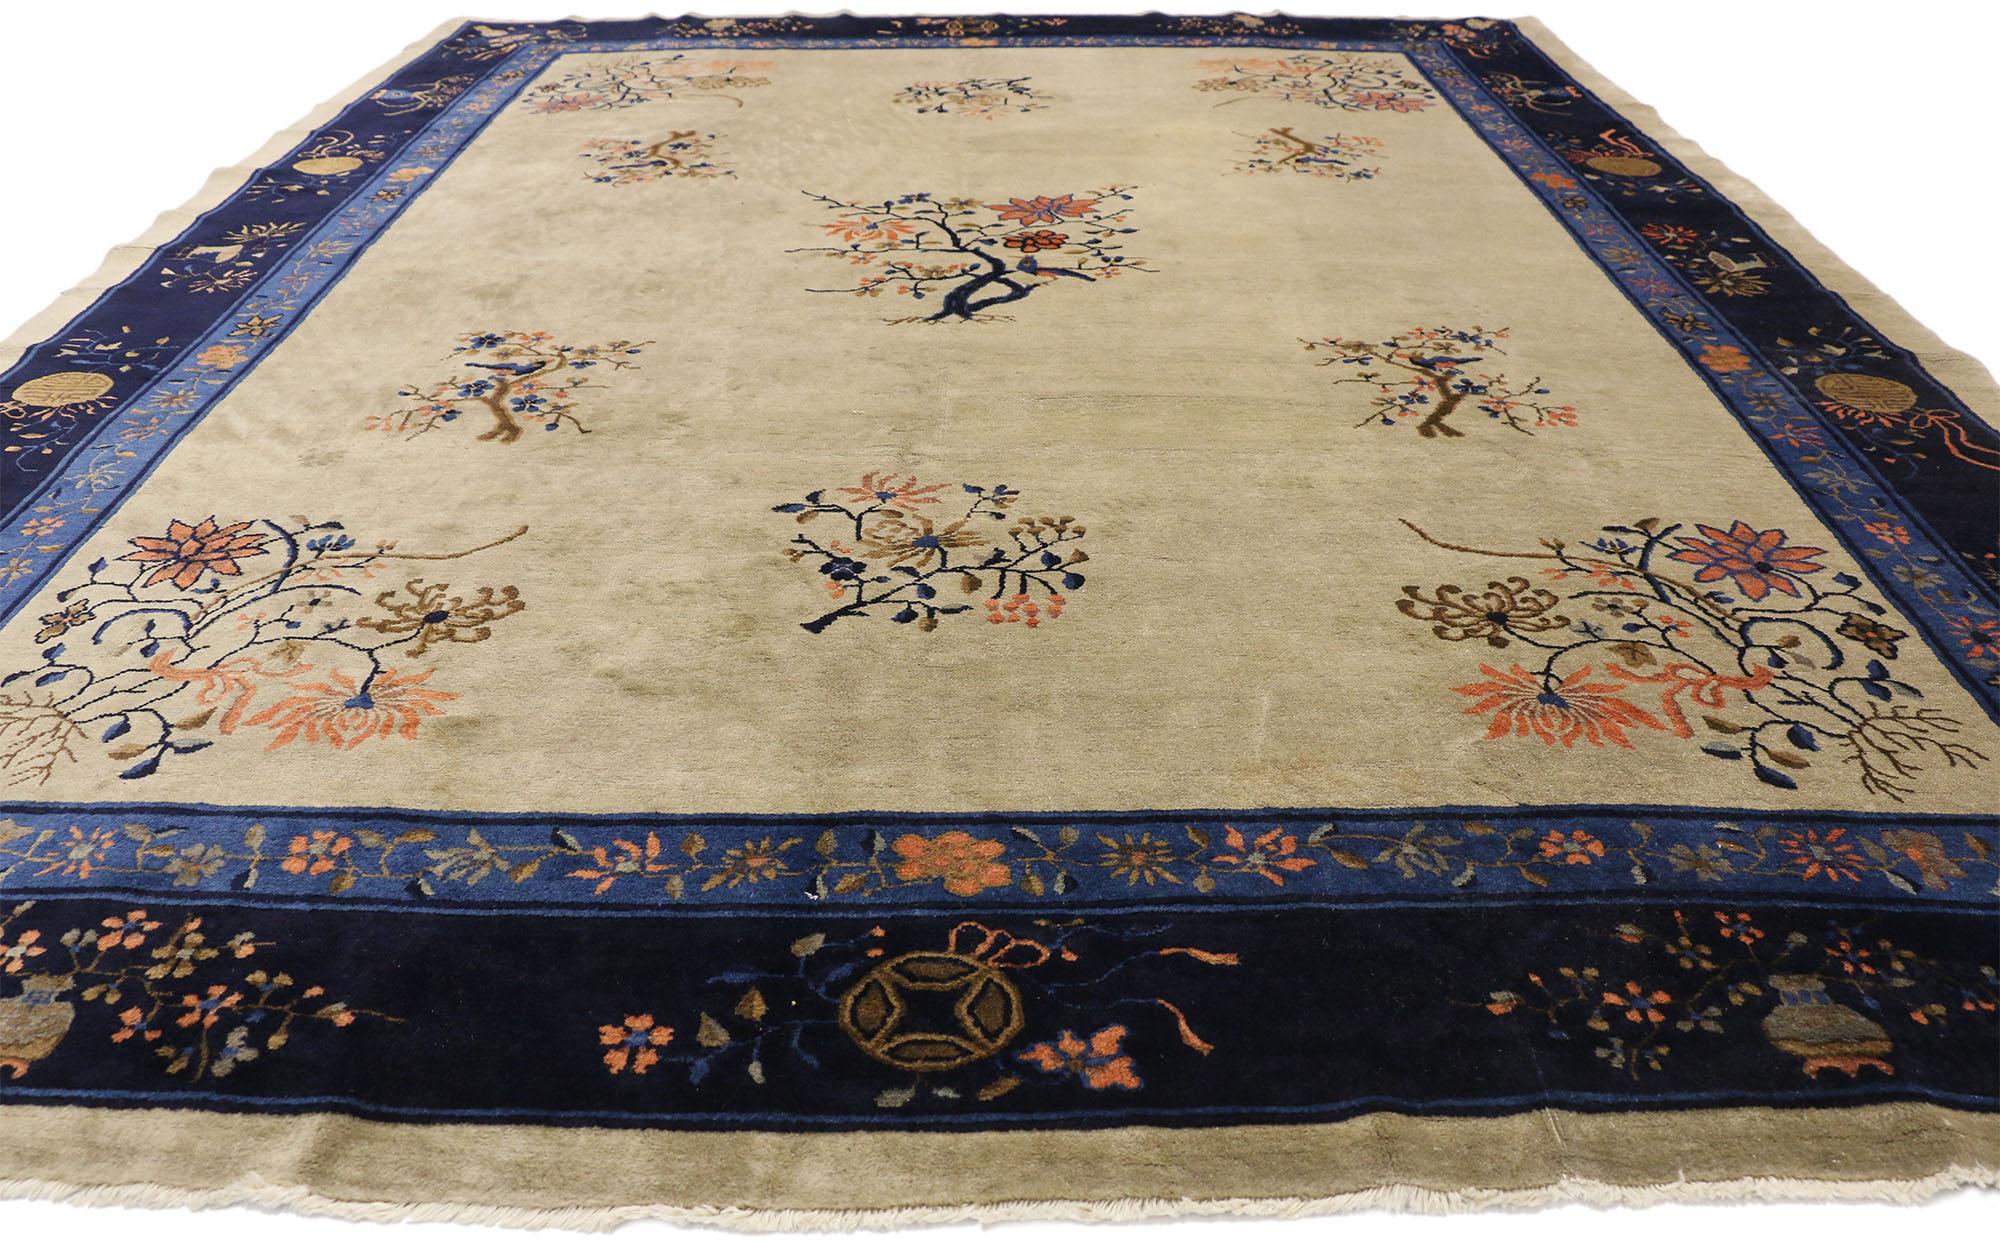 77230 Antique Chinese Peking Rug, 09'00 x 11'04. 
This hand knotted wool antique Chinese Peking rug features a variety of elegant floral motifs spread across a cream field. Each of the floral motifs depicts a tree in bloom with four different types